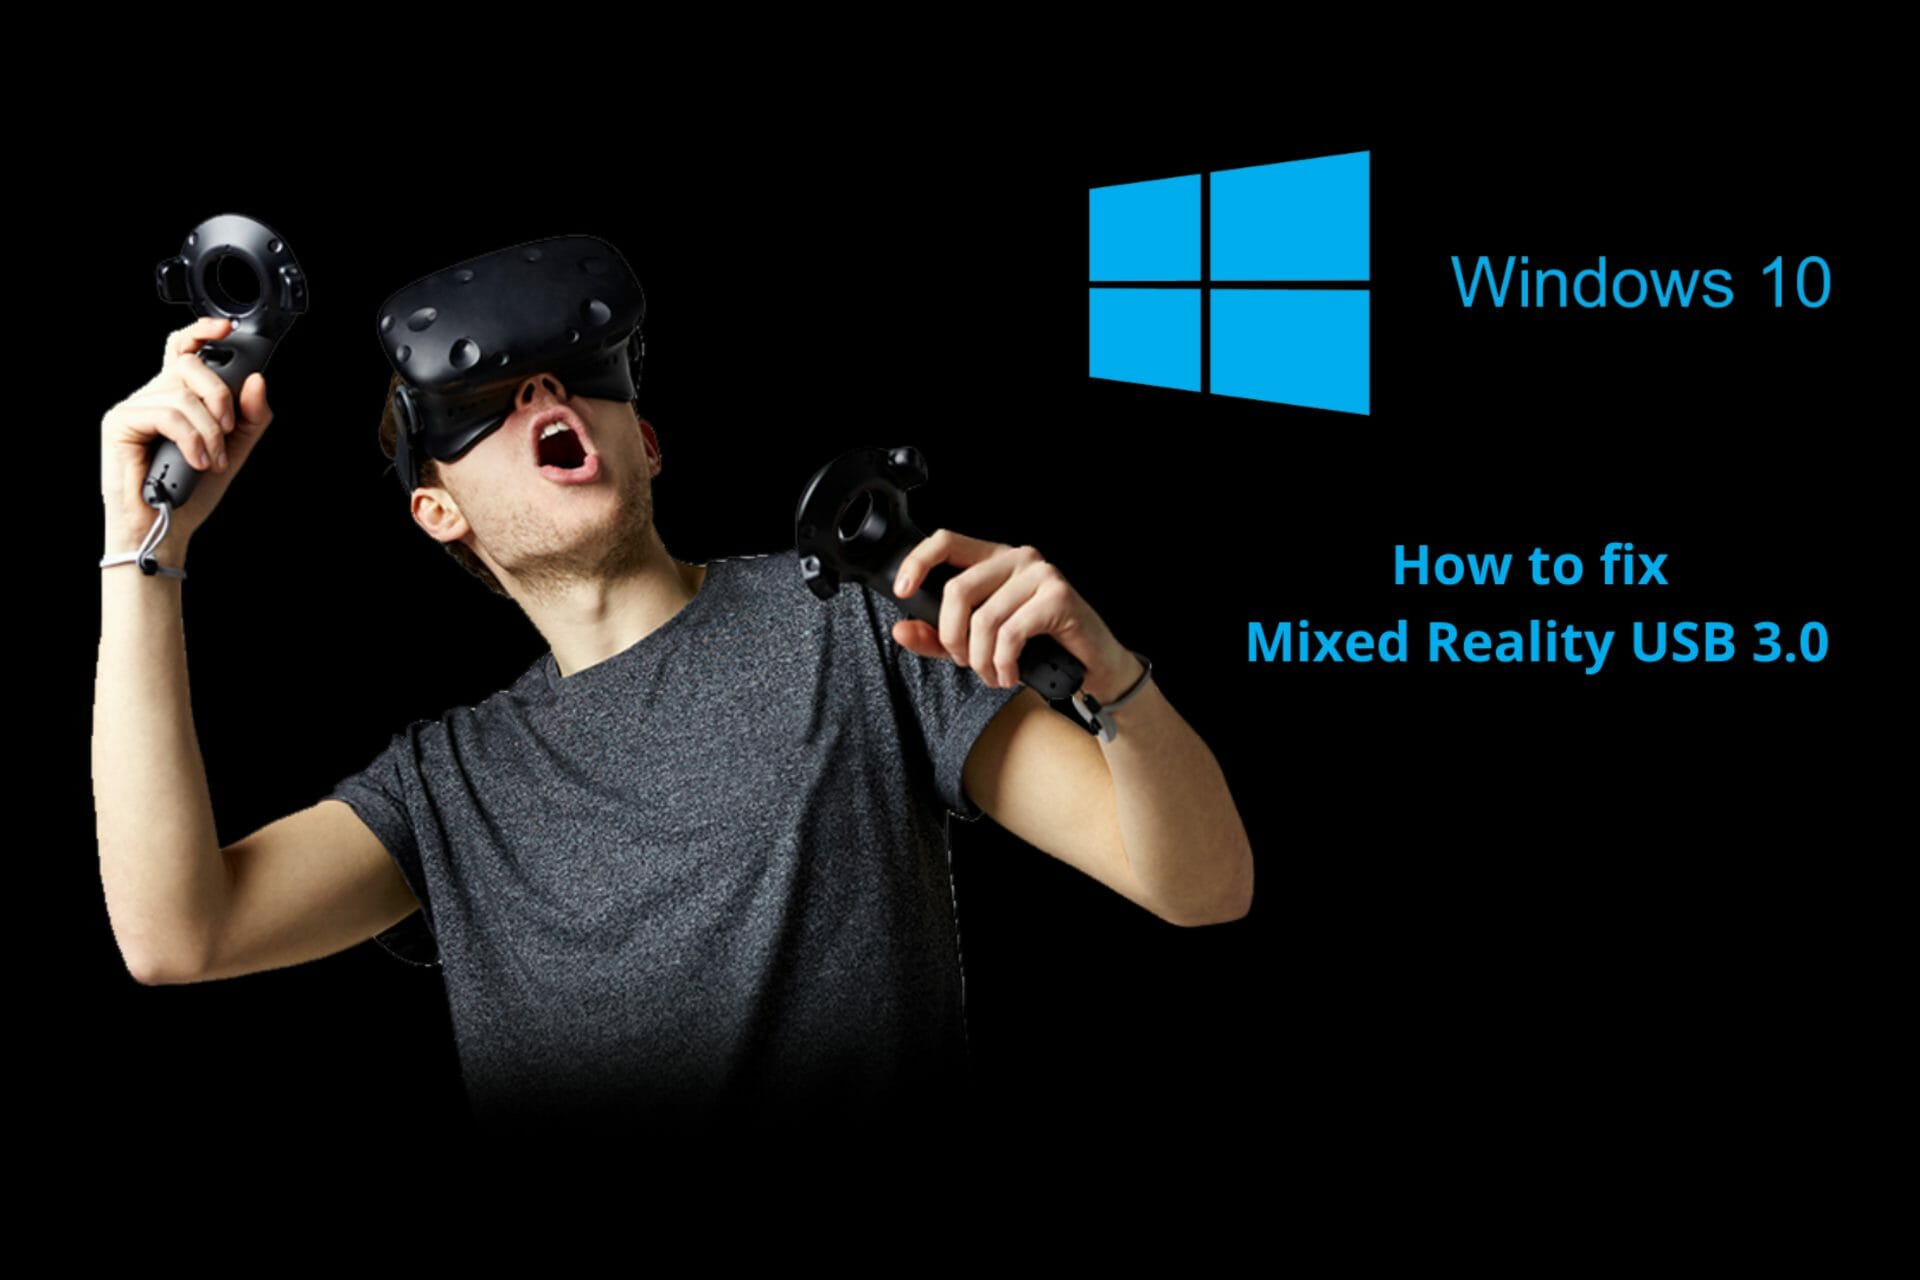 How to fix Windows Mixed Reality USB 3.0 not working